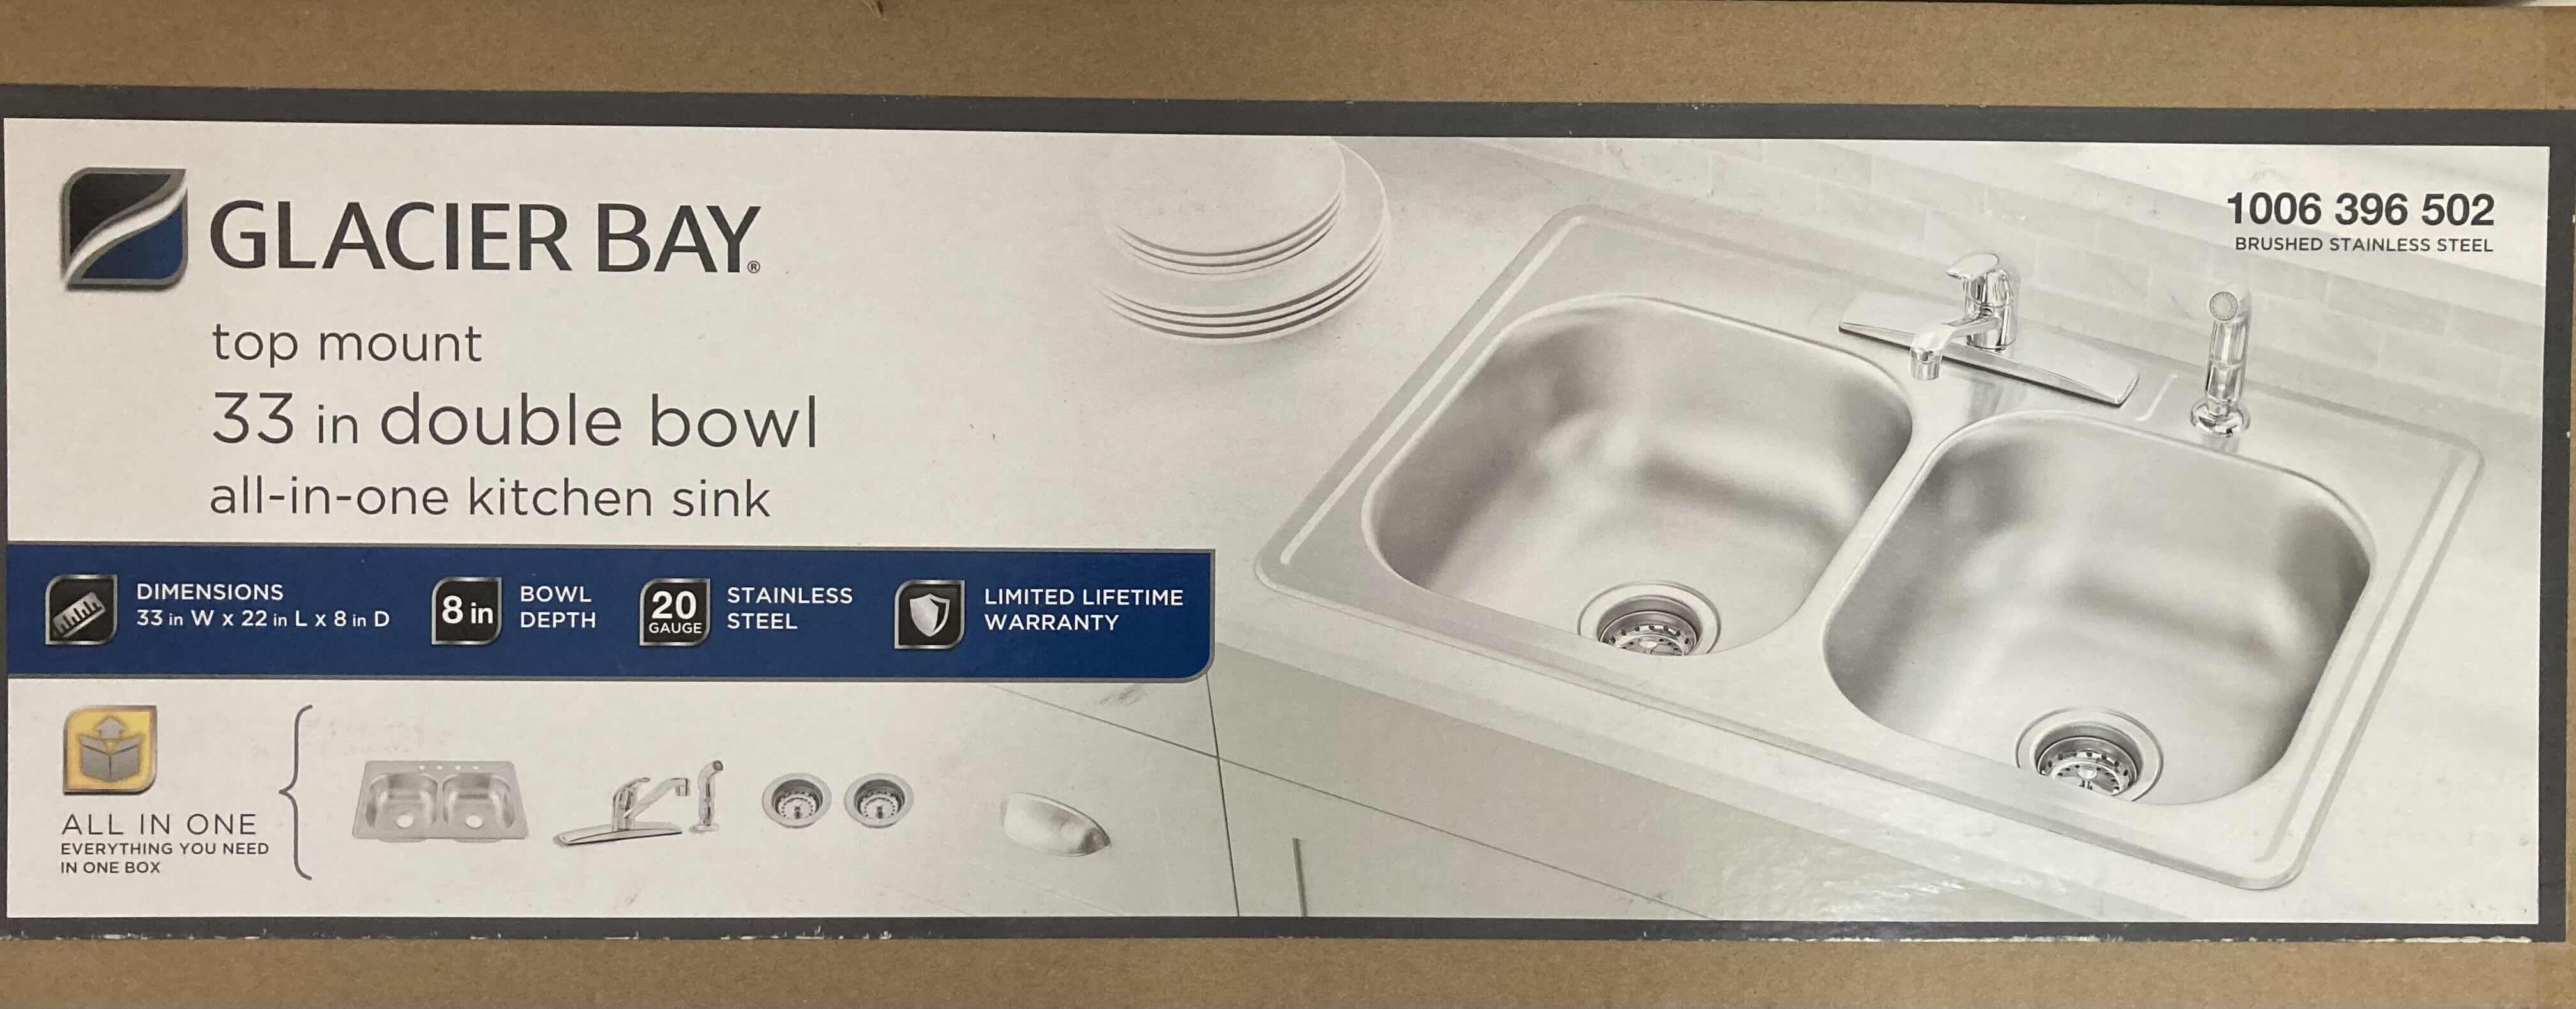 Photo 4 of NEW GLACIER BAY 33" BRUSHED STAINLESS STEEL 20 GAUGE DOUBLE BOWL KITCHEN SINK ALL IN 1 SET MODEL VT3322A08SHA1